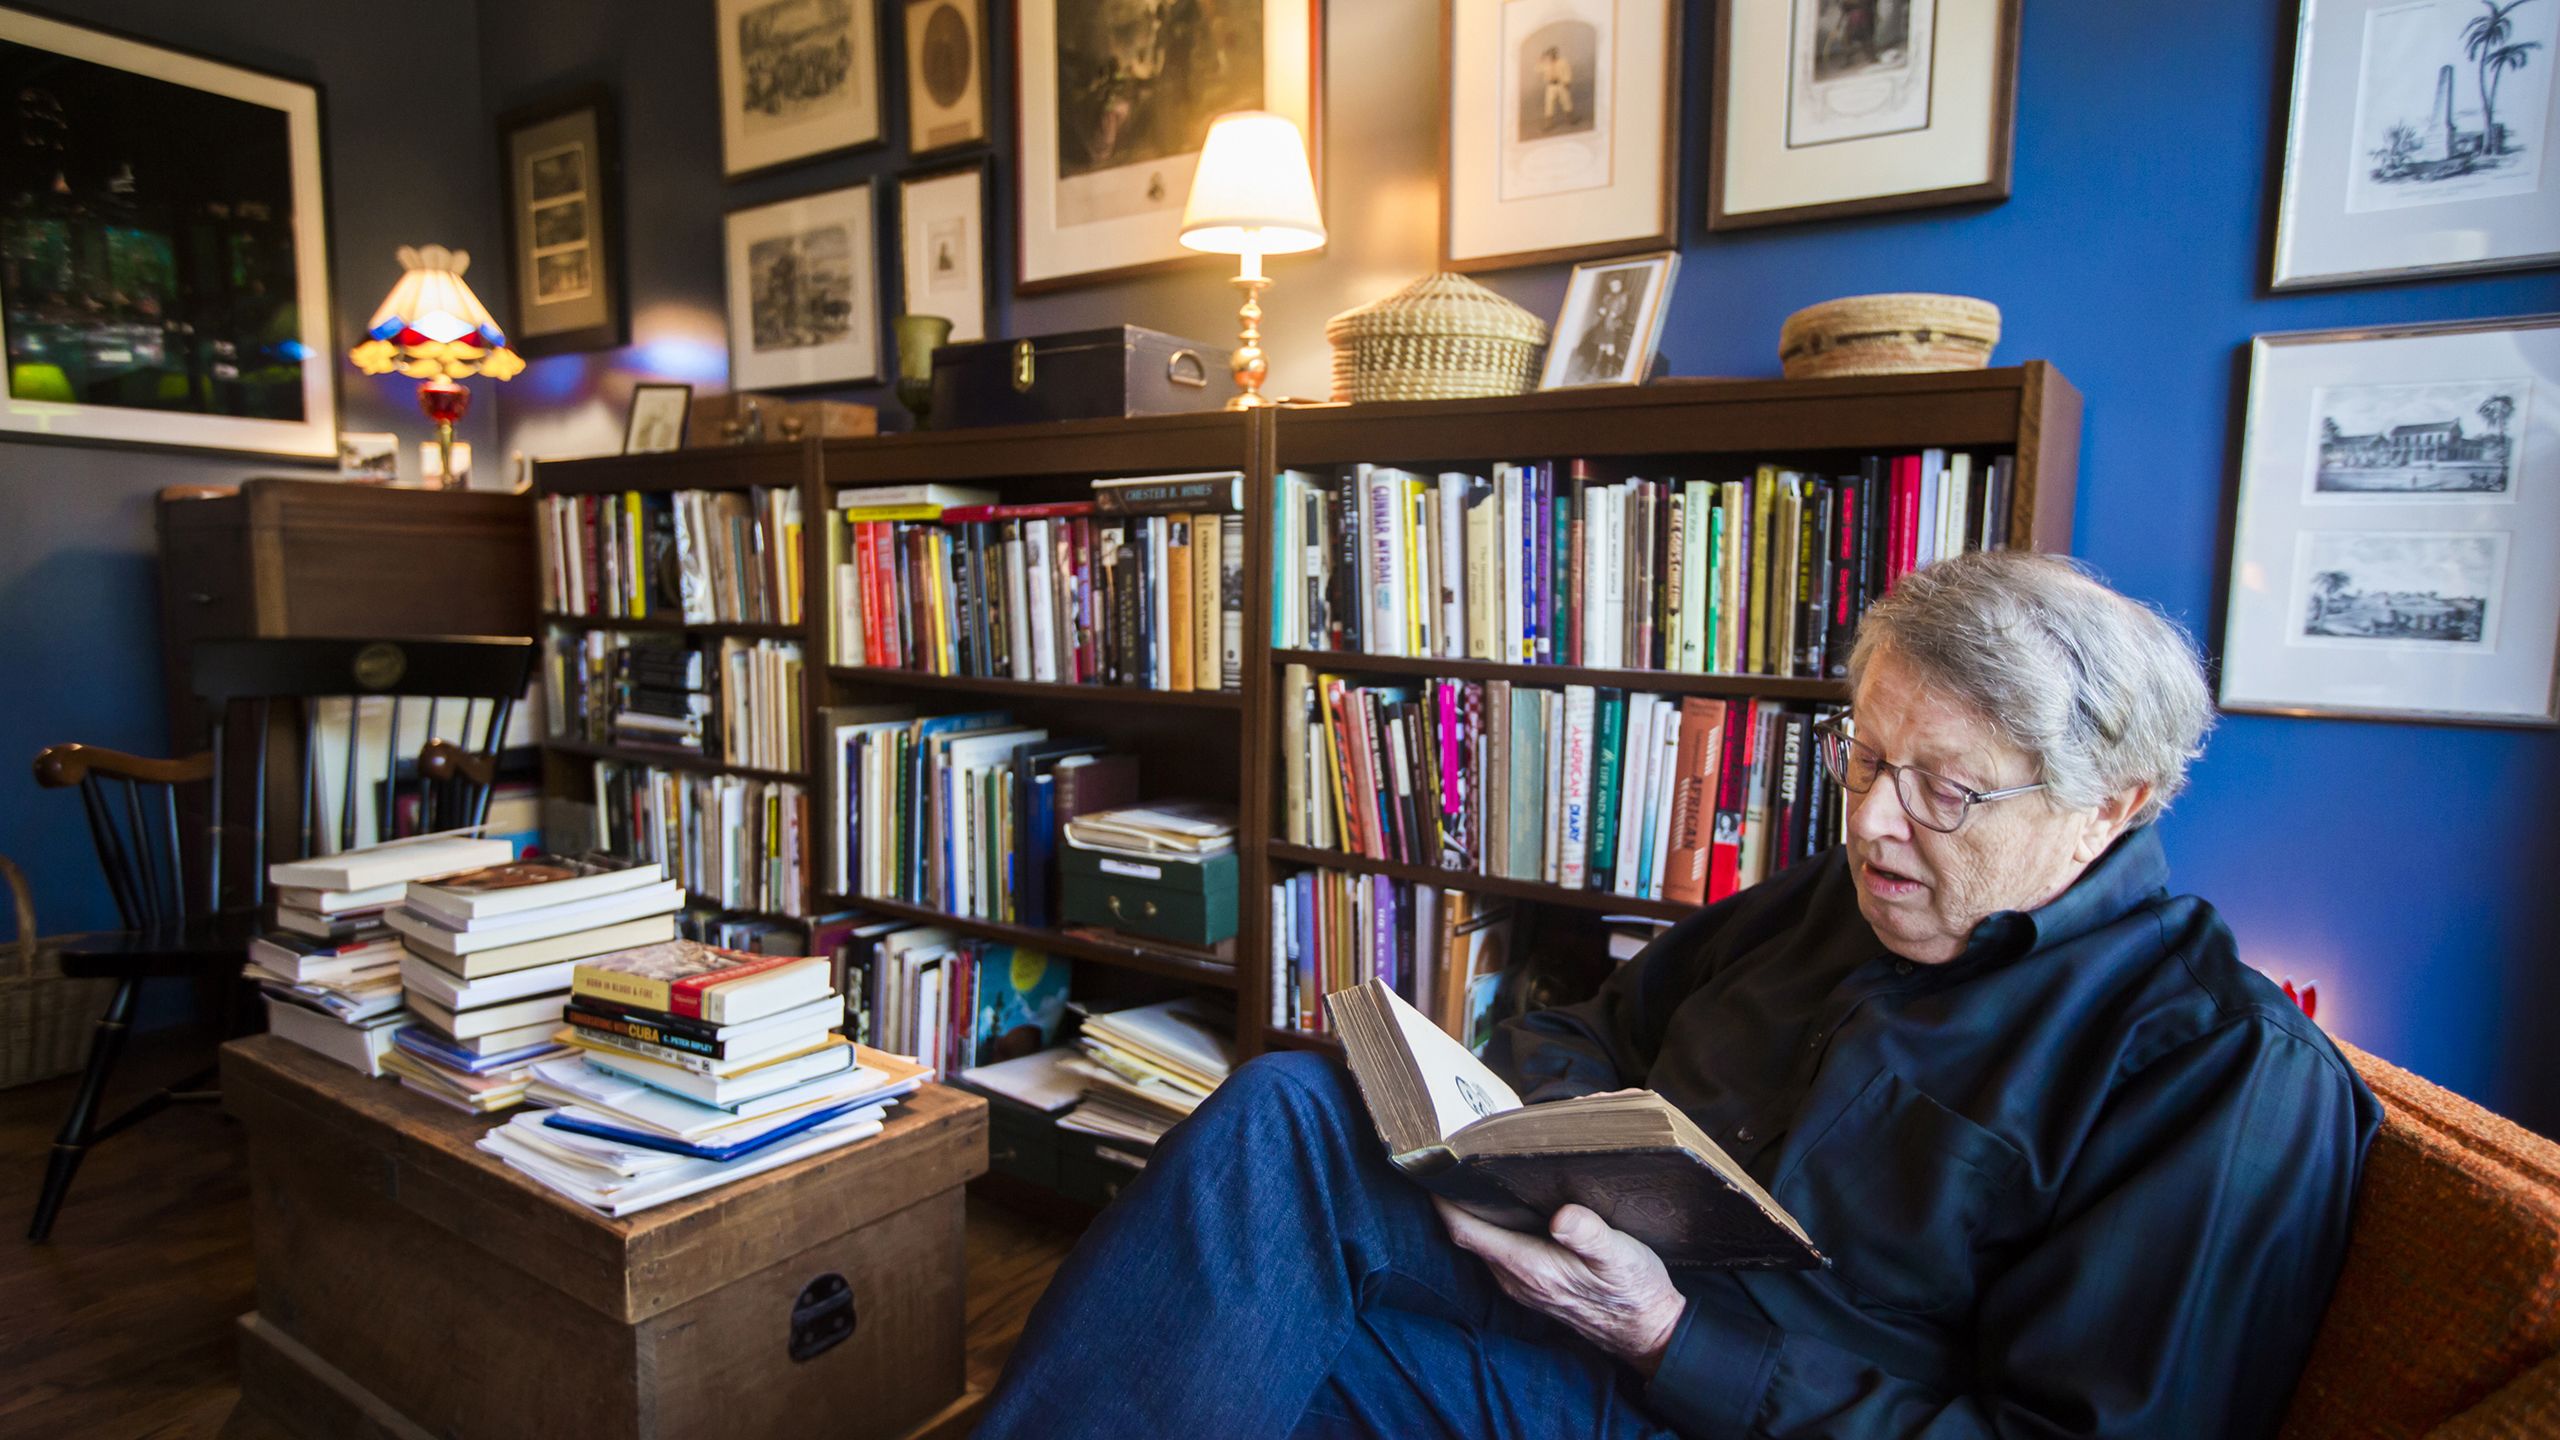 Burkett sitting in a chair in his home library while looking down at an open book in his hands